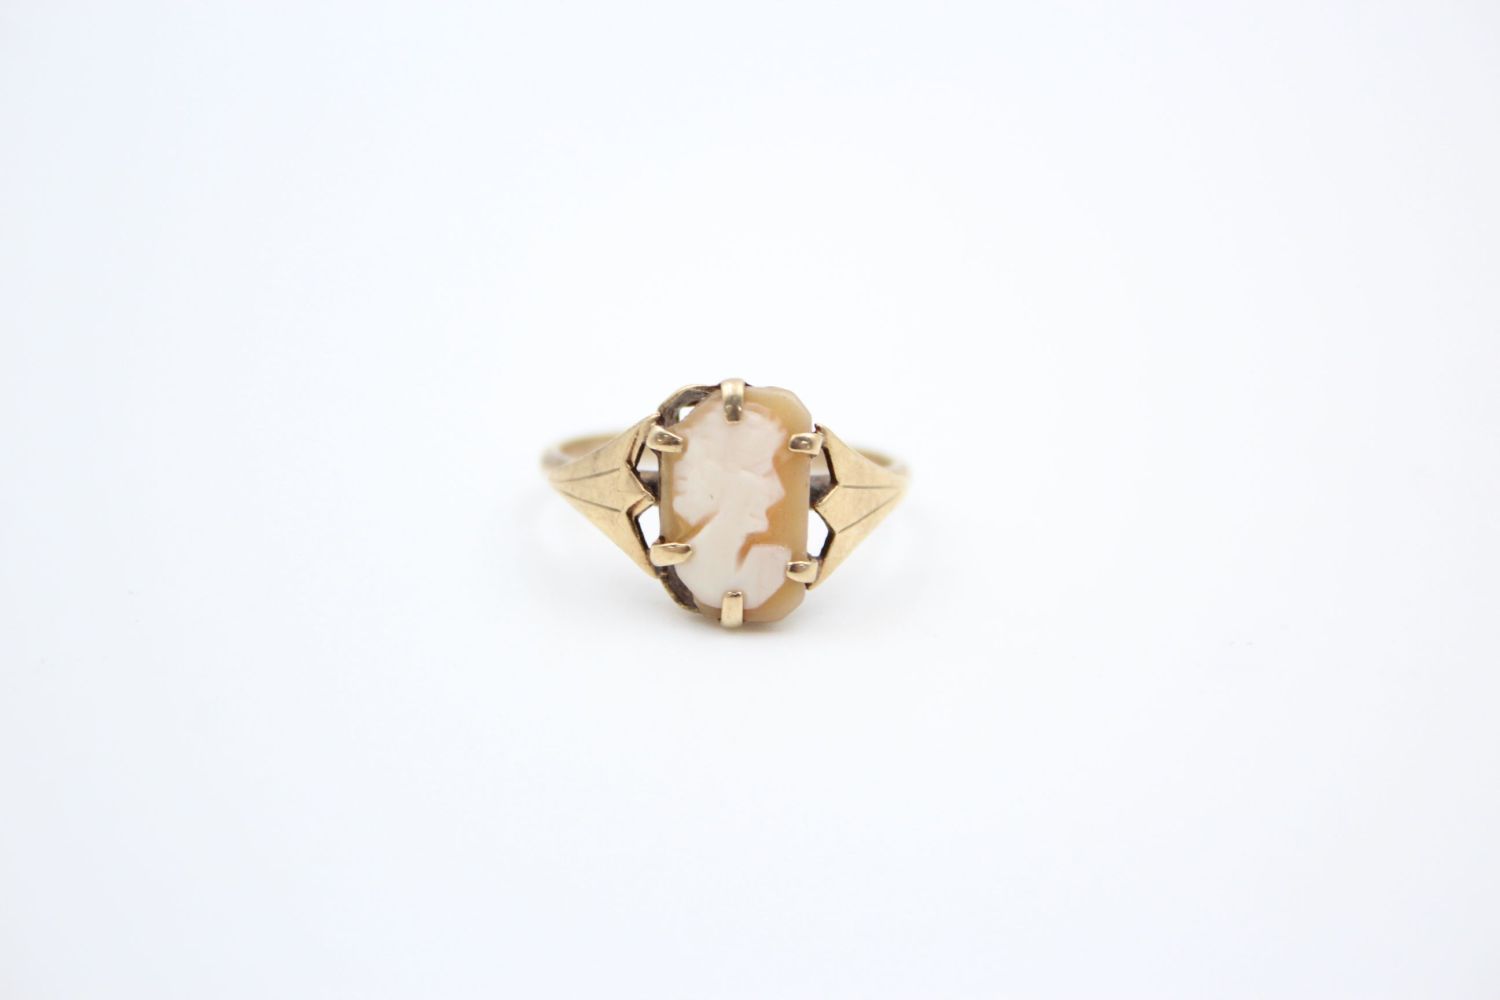 2 x 9ct gold cameo rings 4.9 grams gross - Image 7 of 11